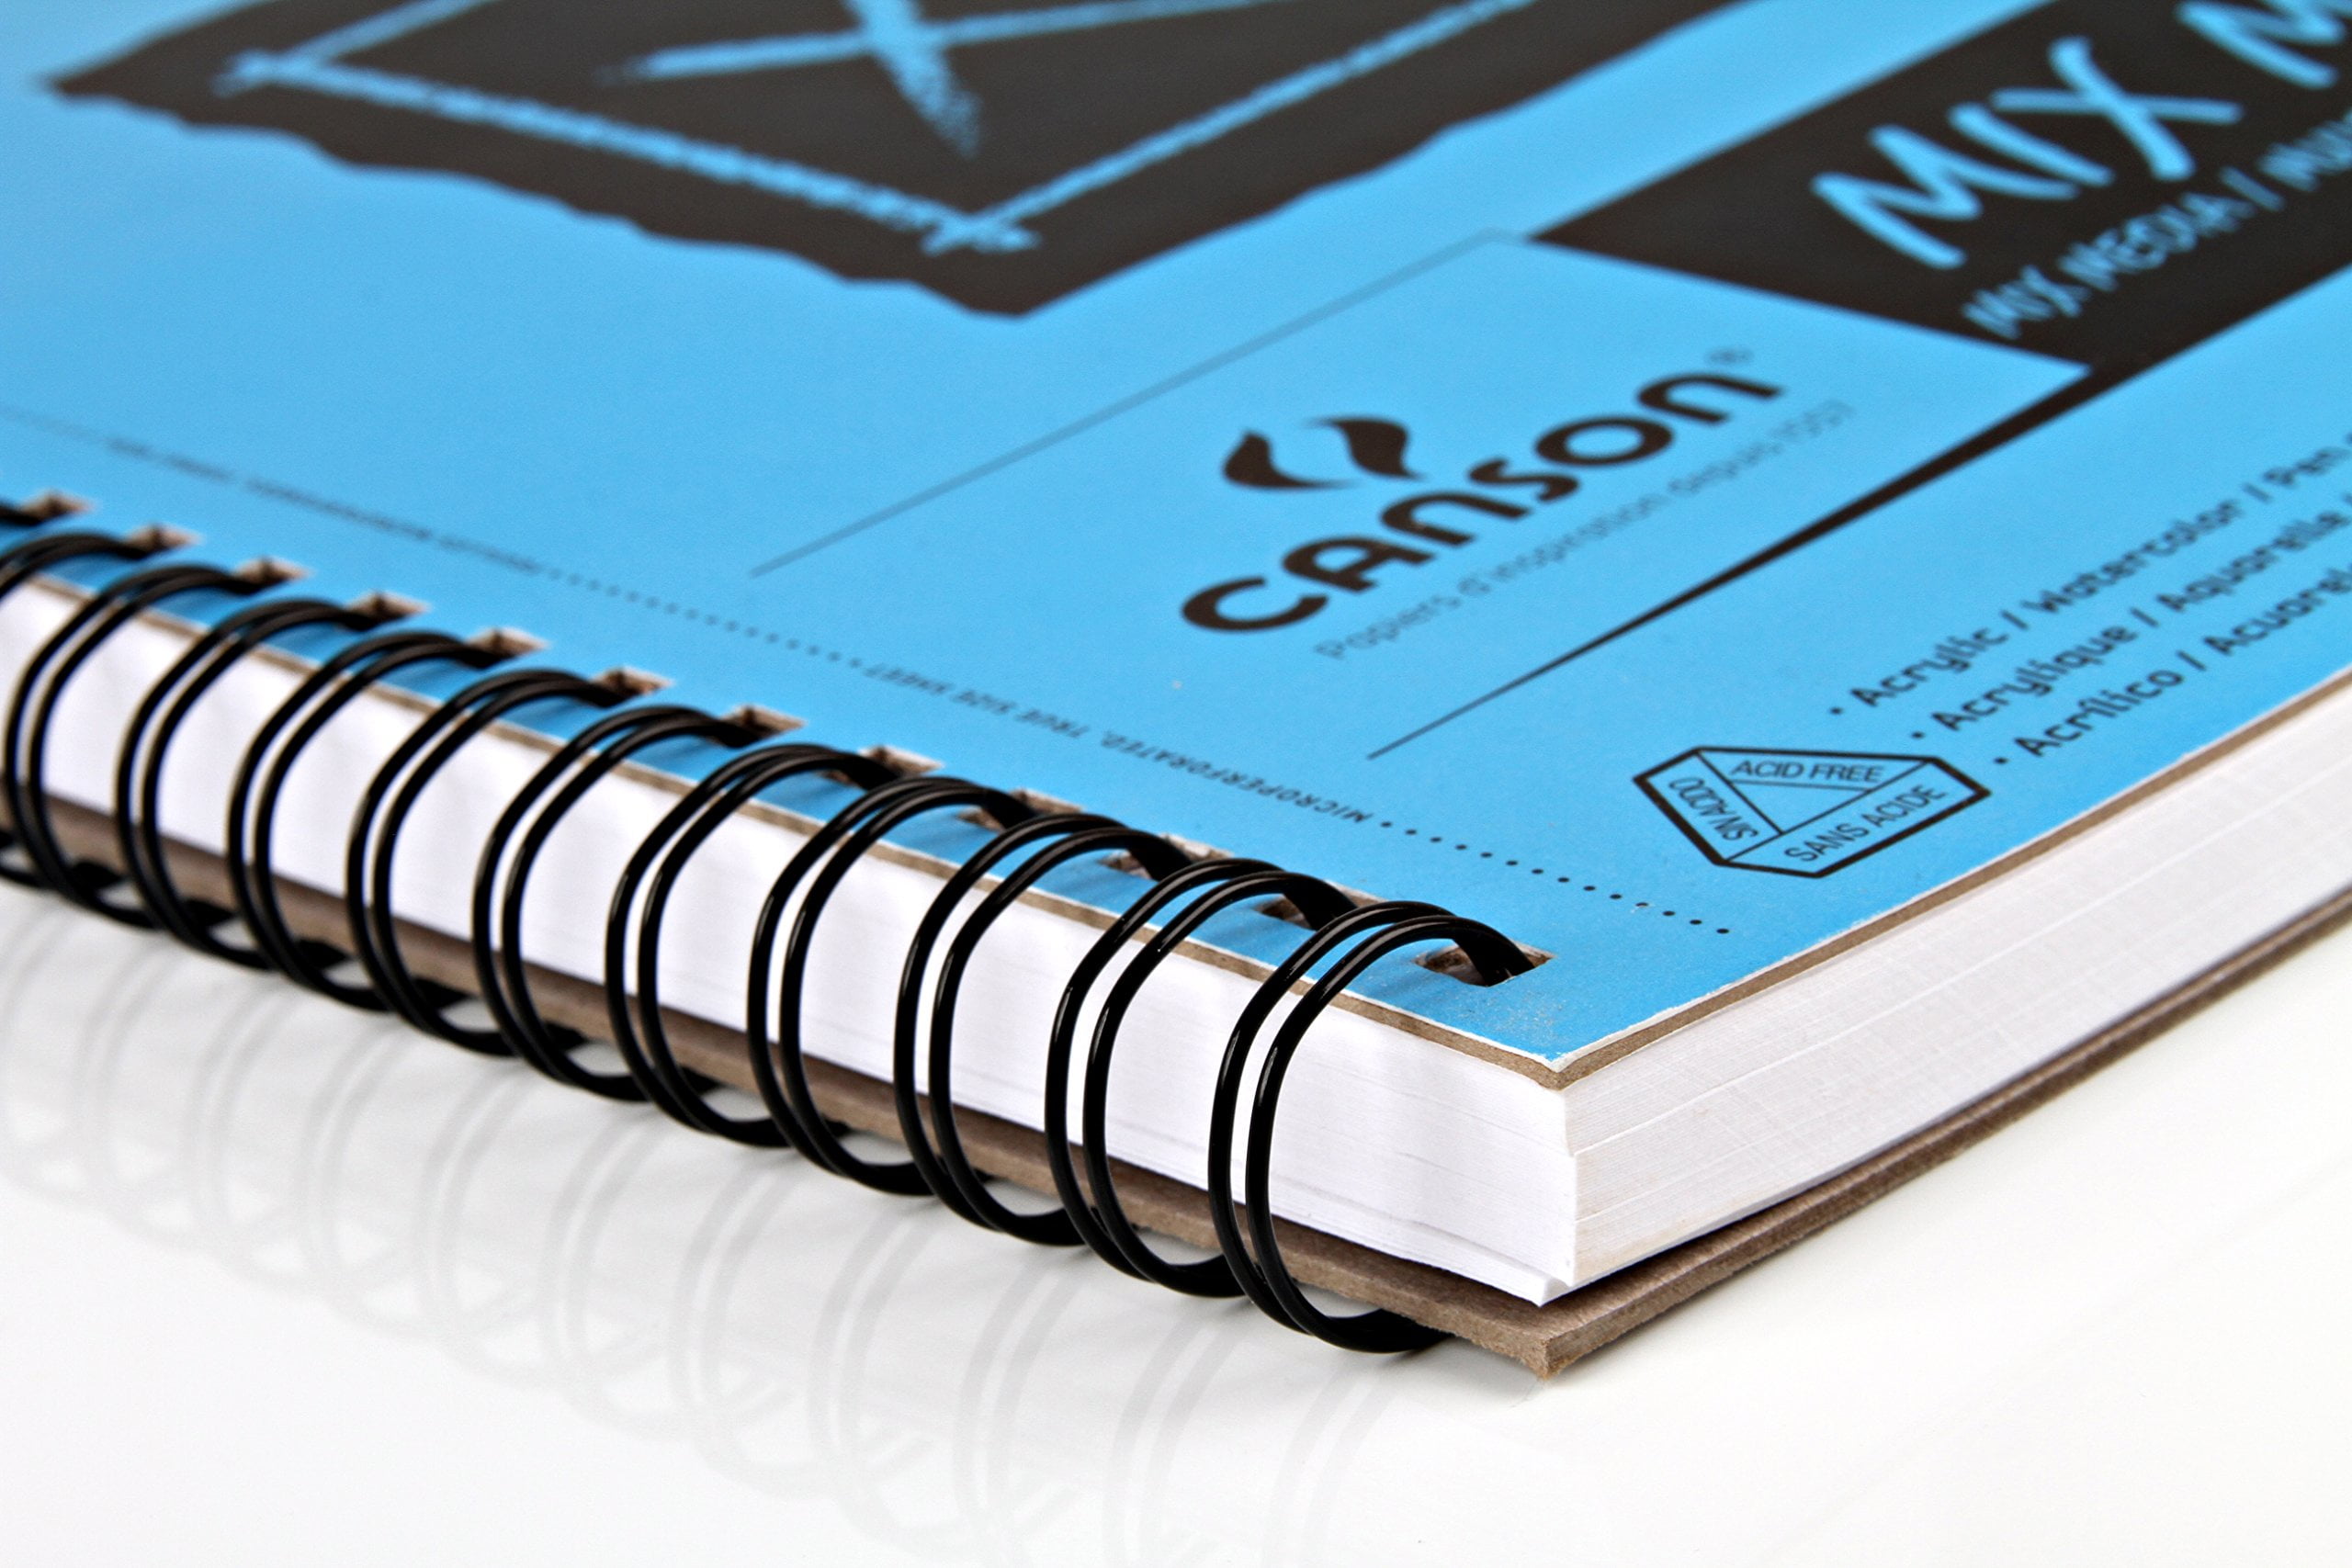 Canson® XL® Hardcover Mix Media Pad